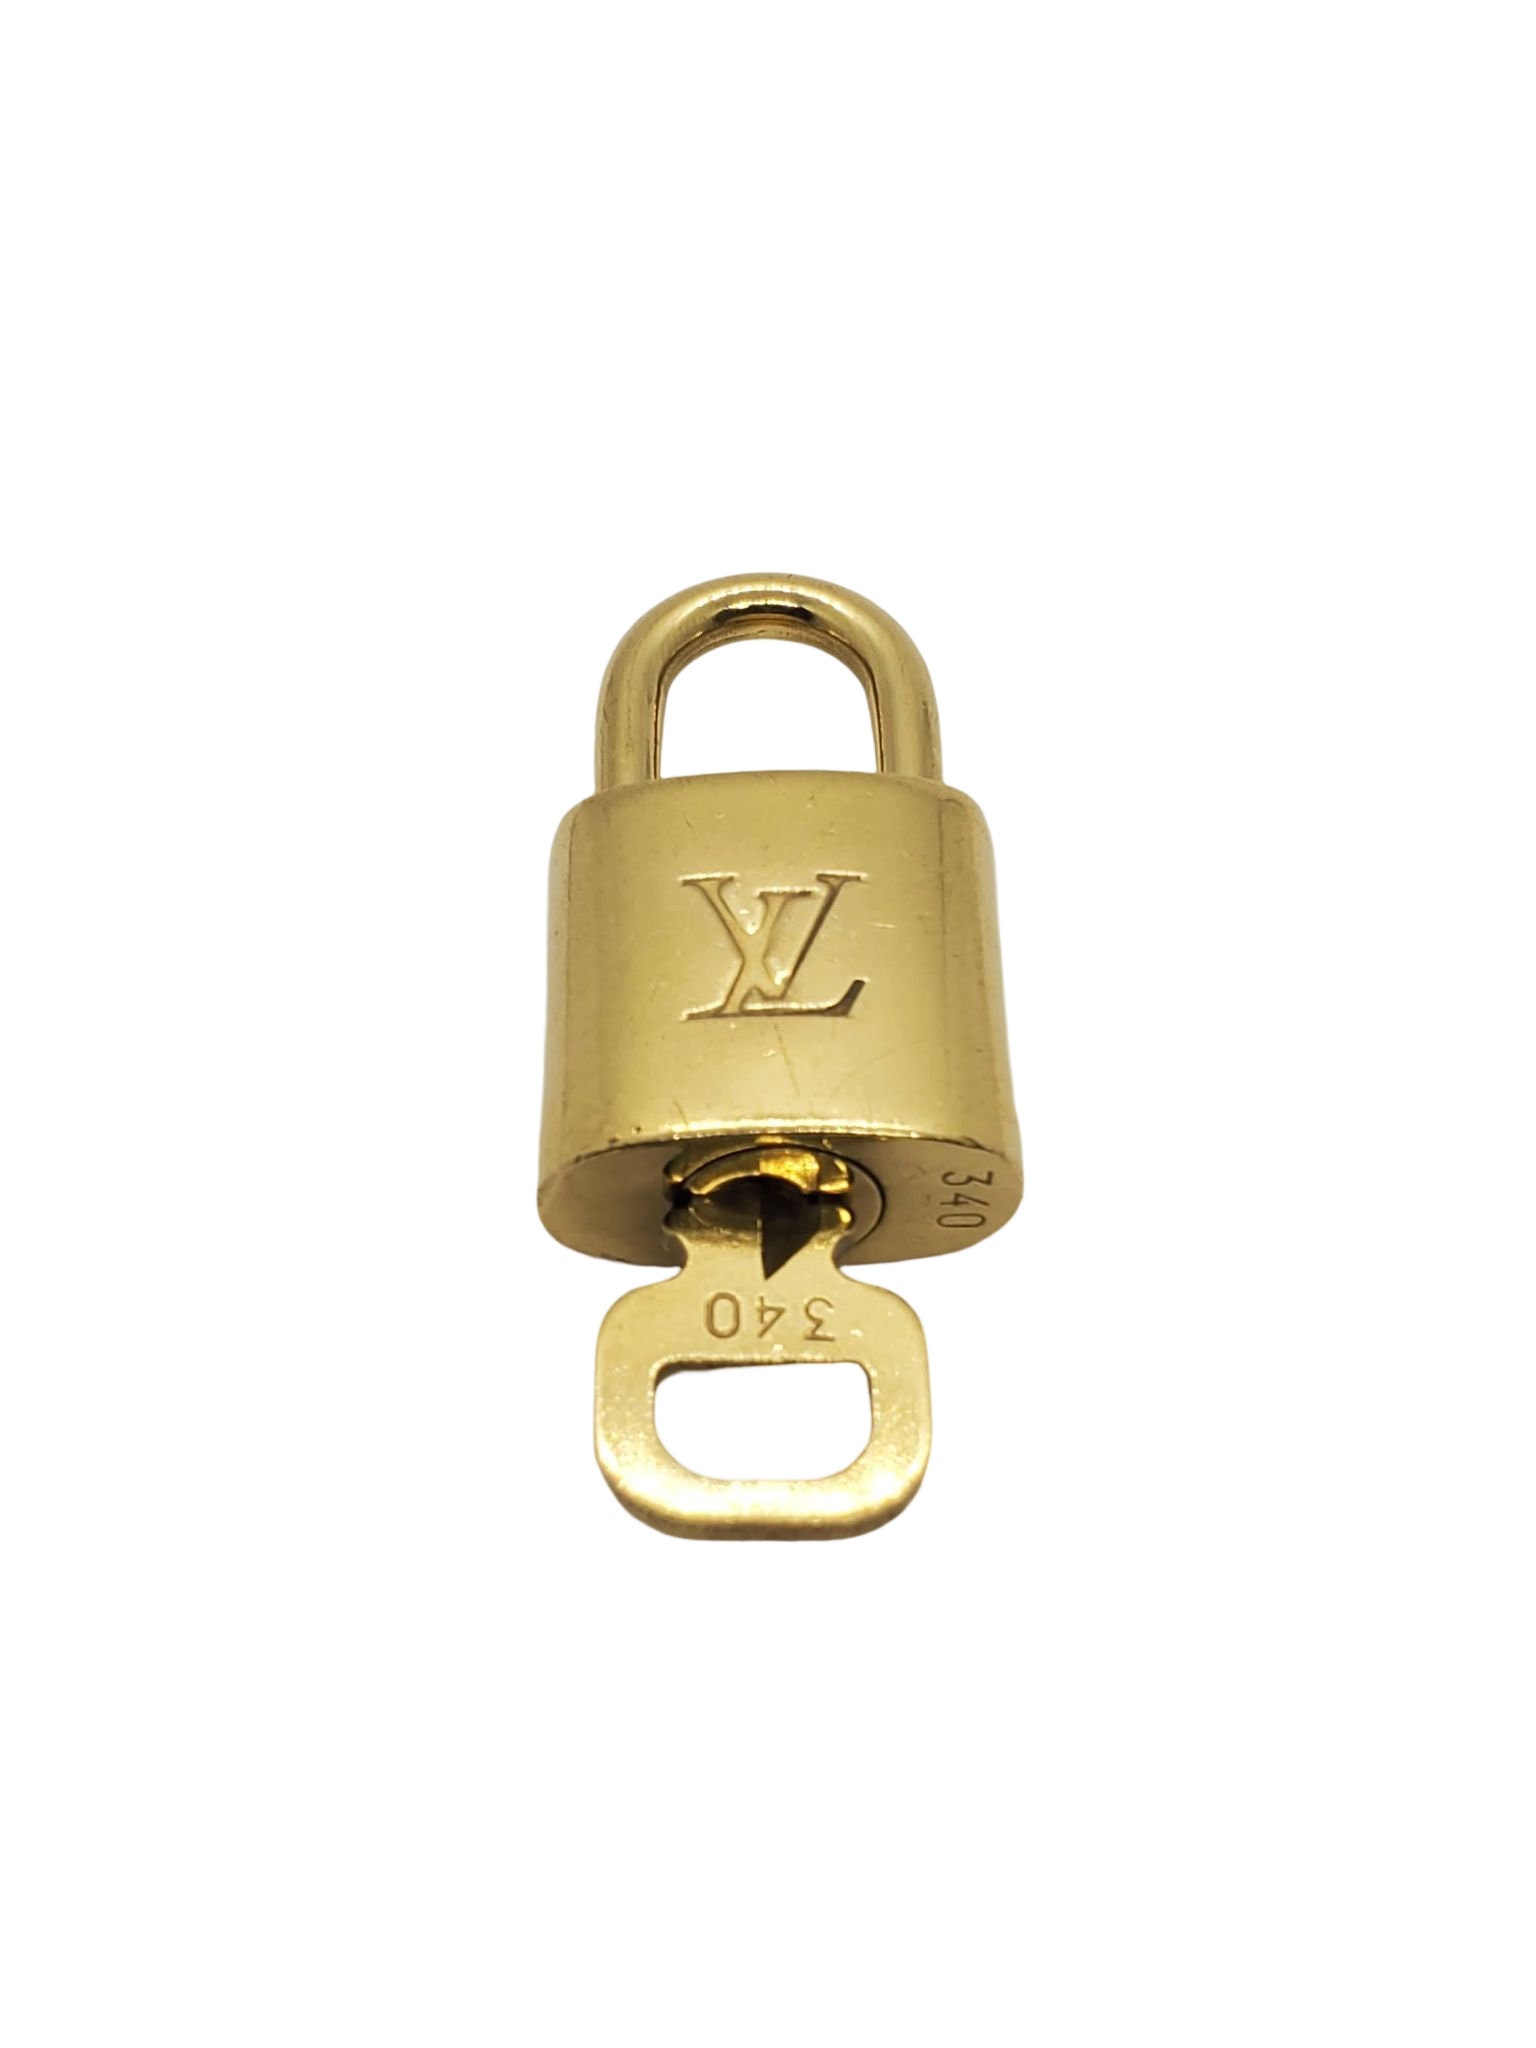 Buy Louis Vuitton Padlock and NO KEY 306 Lock Brass 6142 Online in India 